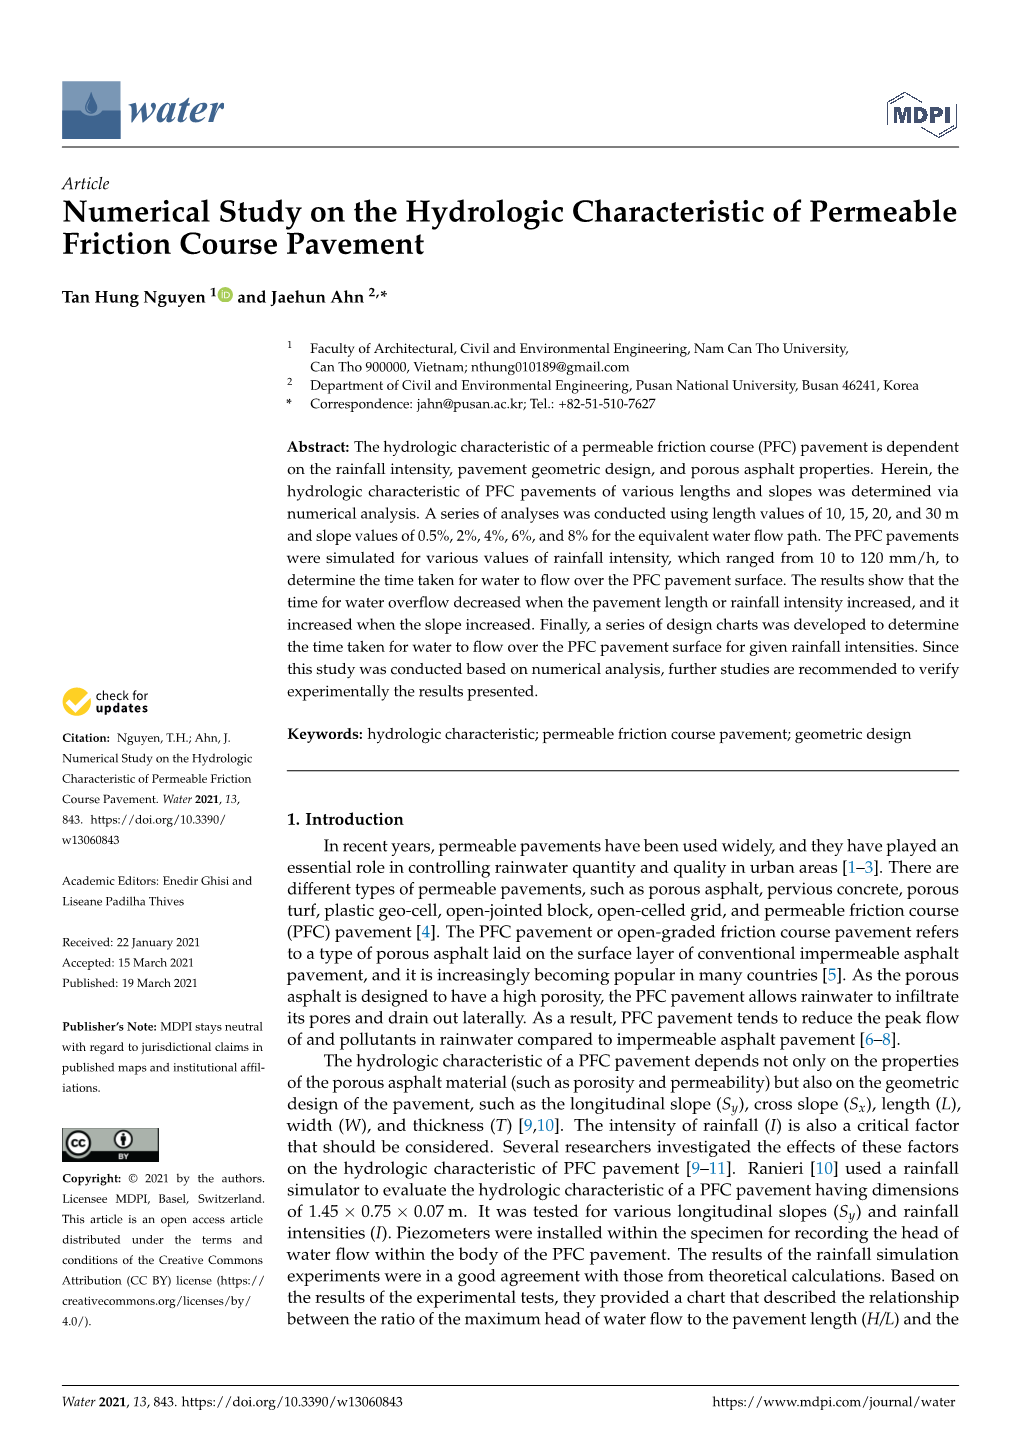 Numerical Study on the Hydrologic Characteristic of Permeable Friction Course Pavement